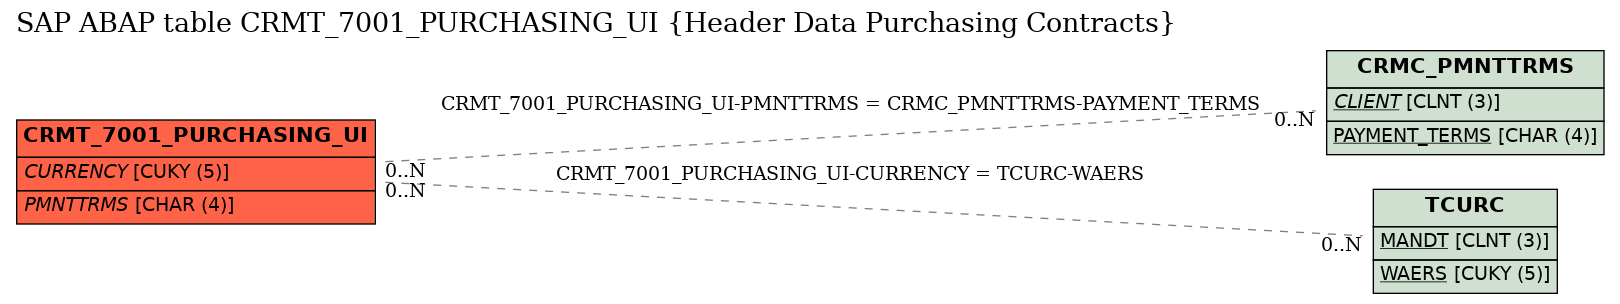 E-R Diagram for table CRMT_7001_PURCHASING_UI (Header Data Purchasing Contracts)